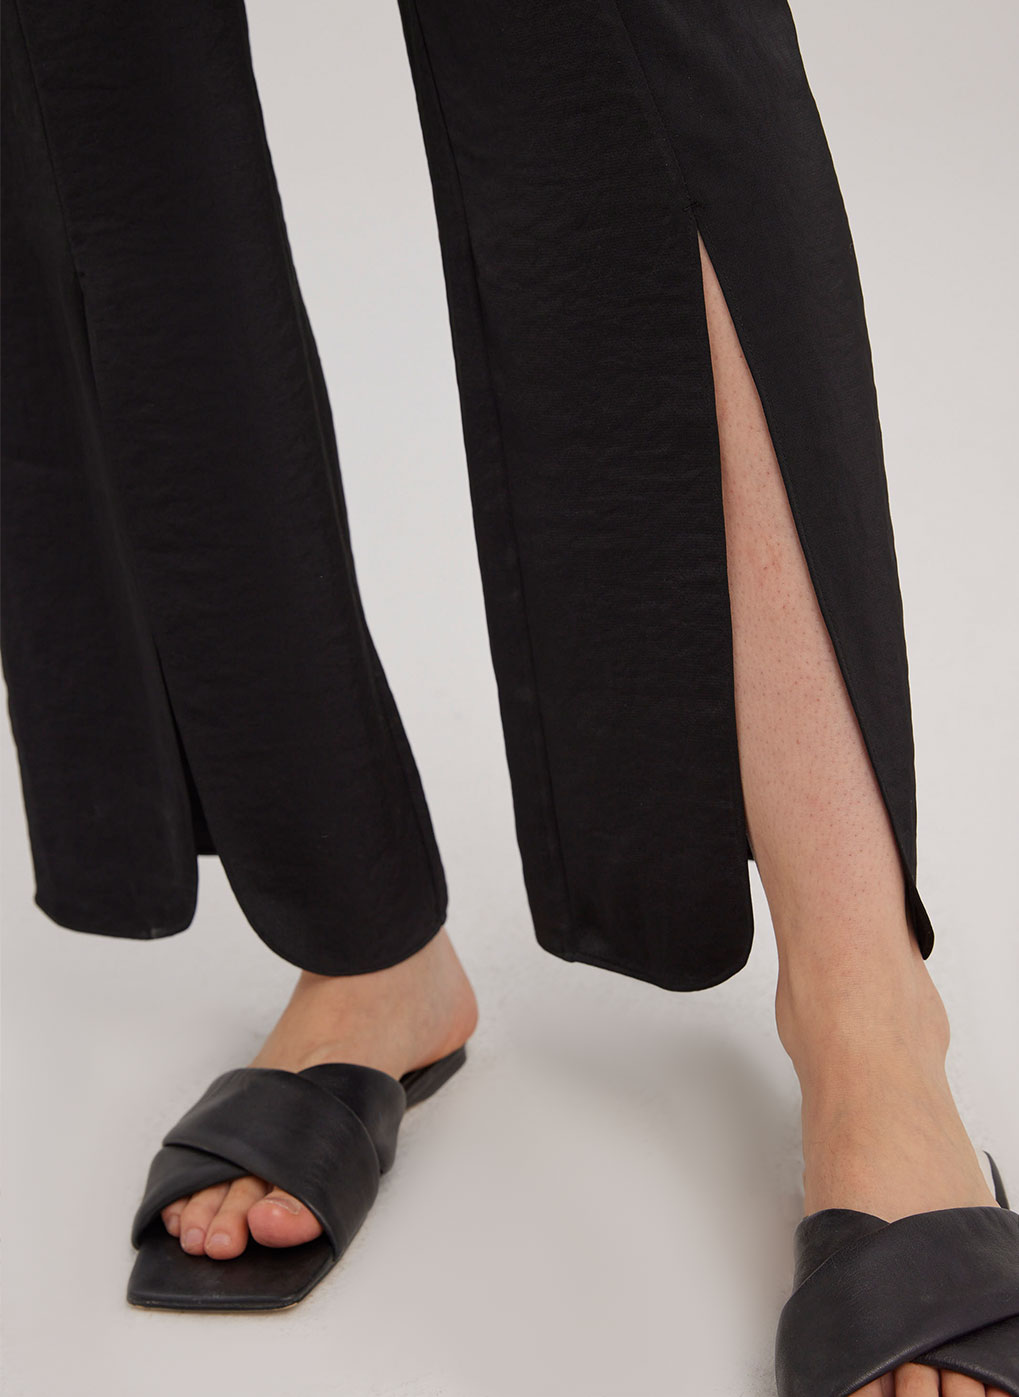 black pants with slits in the front